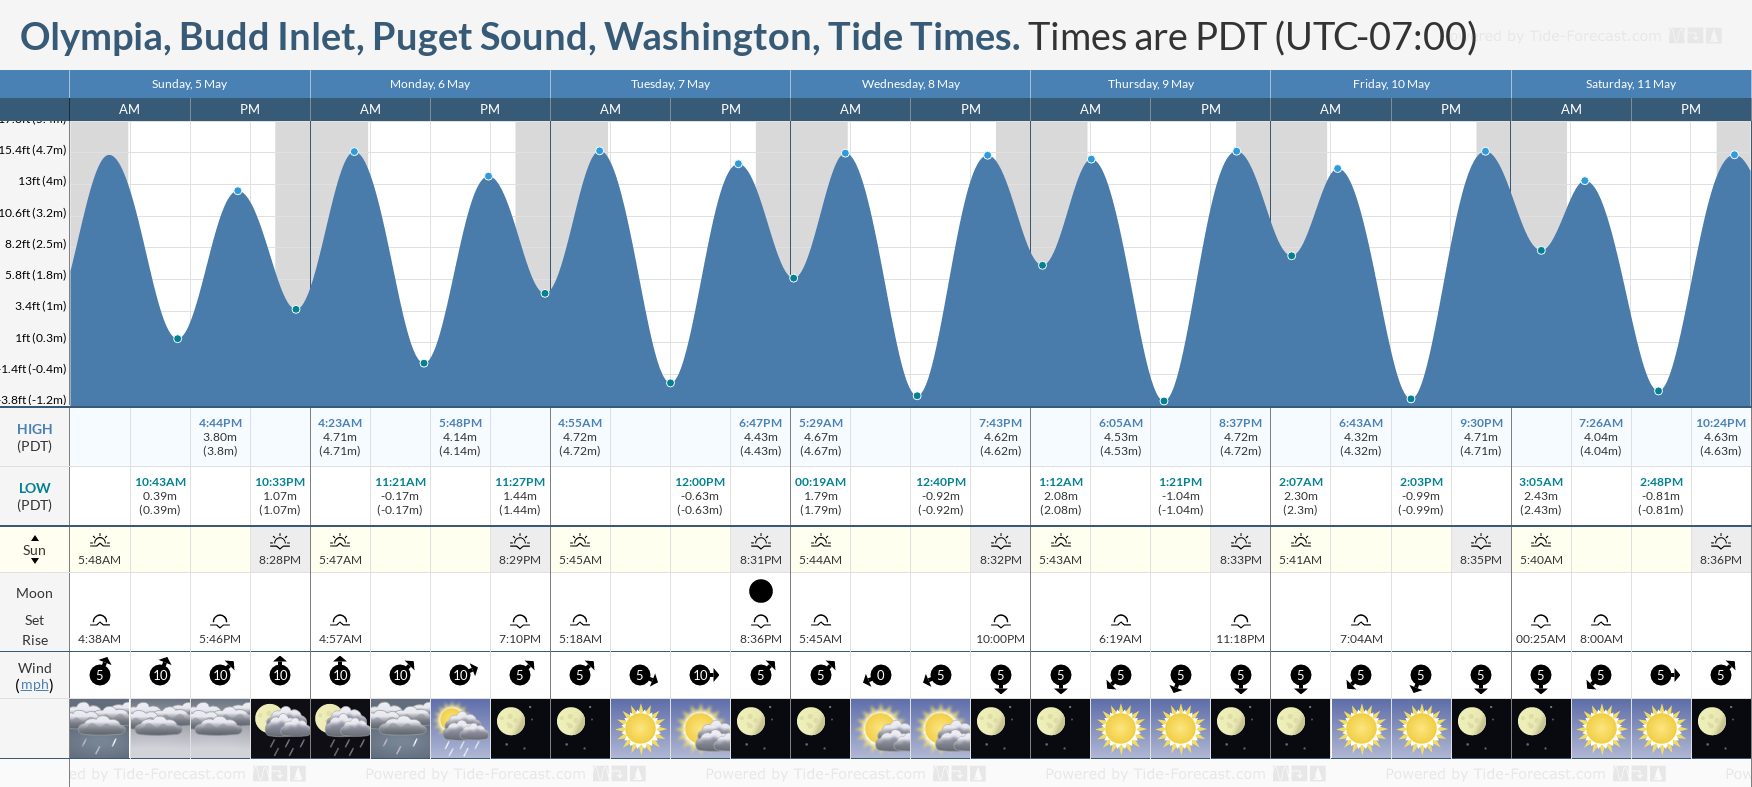 Olympia, Budd Inlet, Puget Sound, Washington Tide Chart including high and low tide tide times for the next 7 days